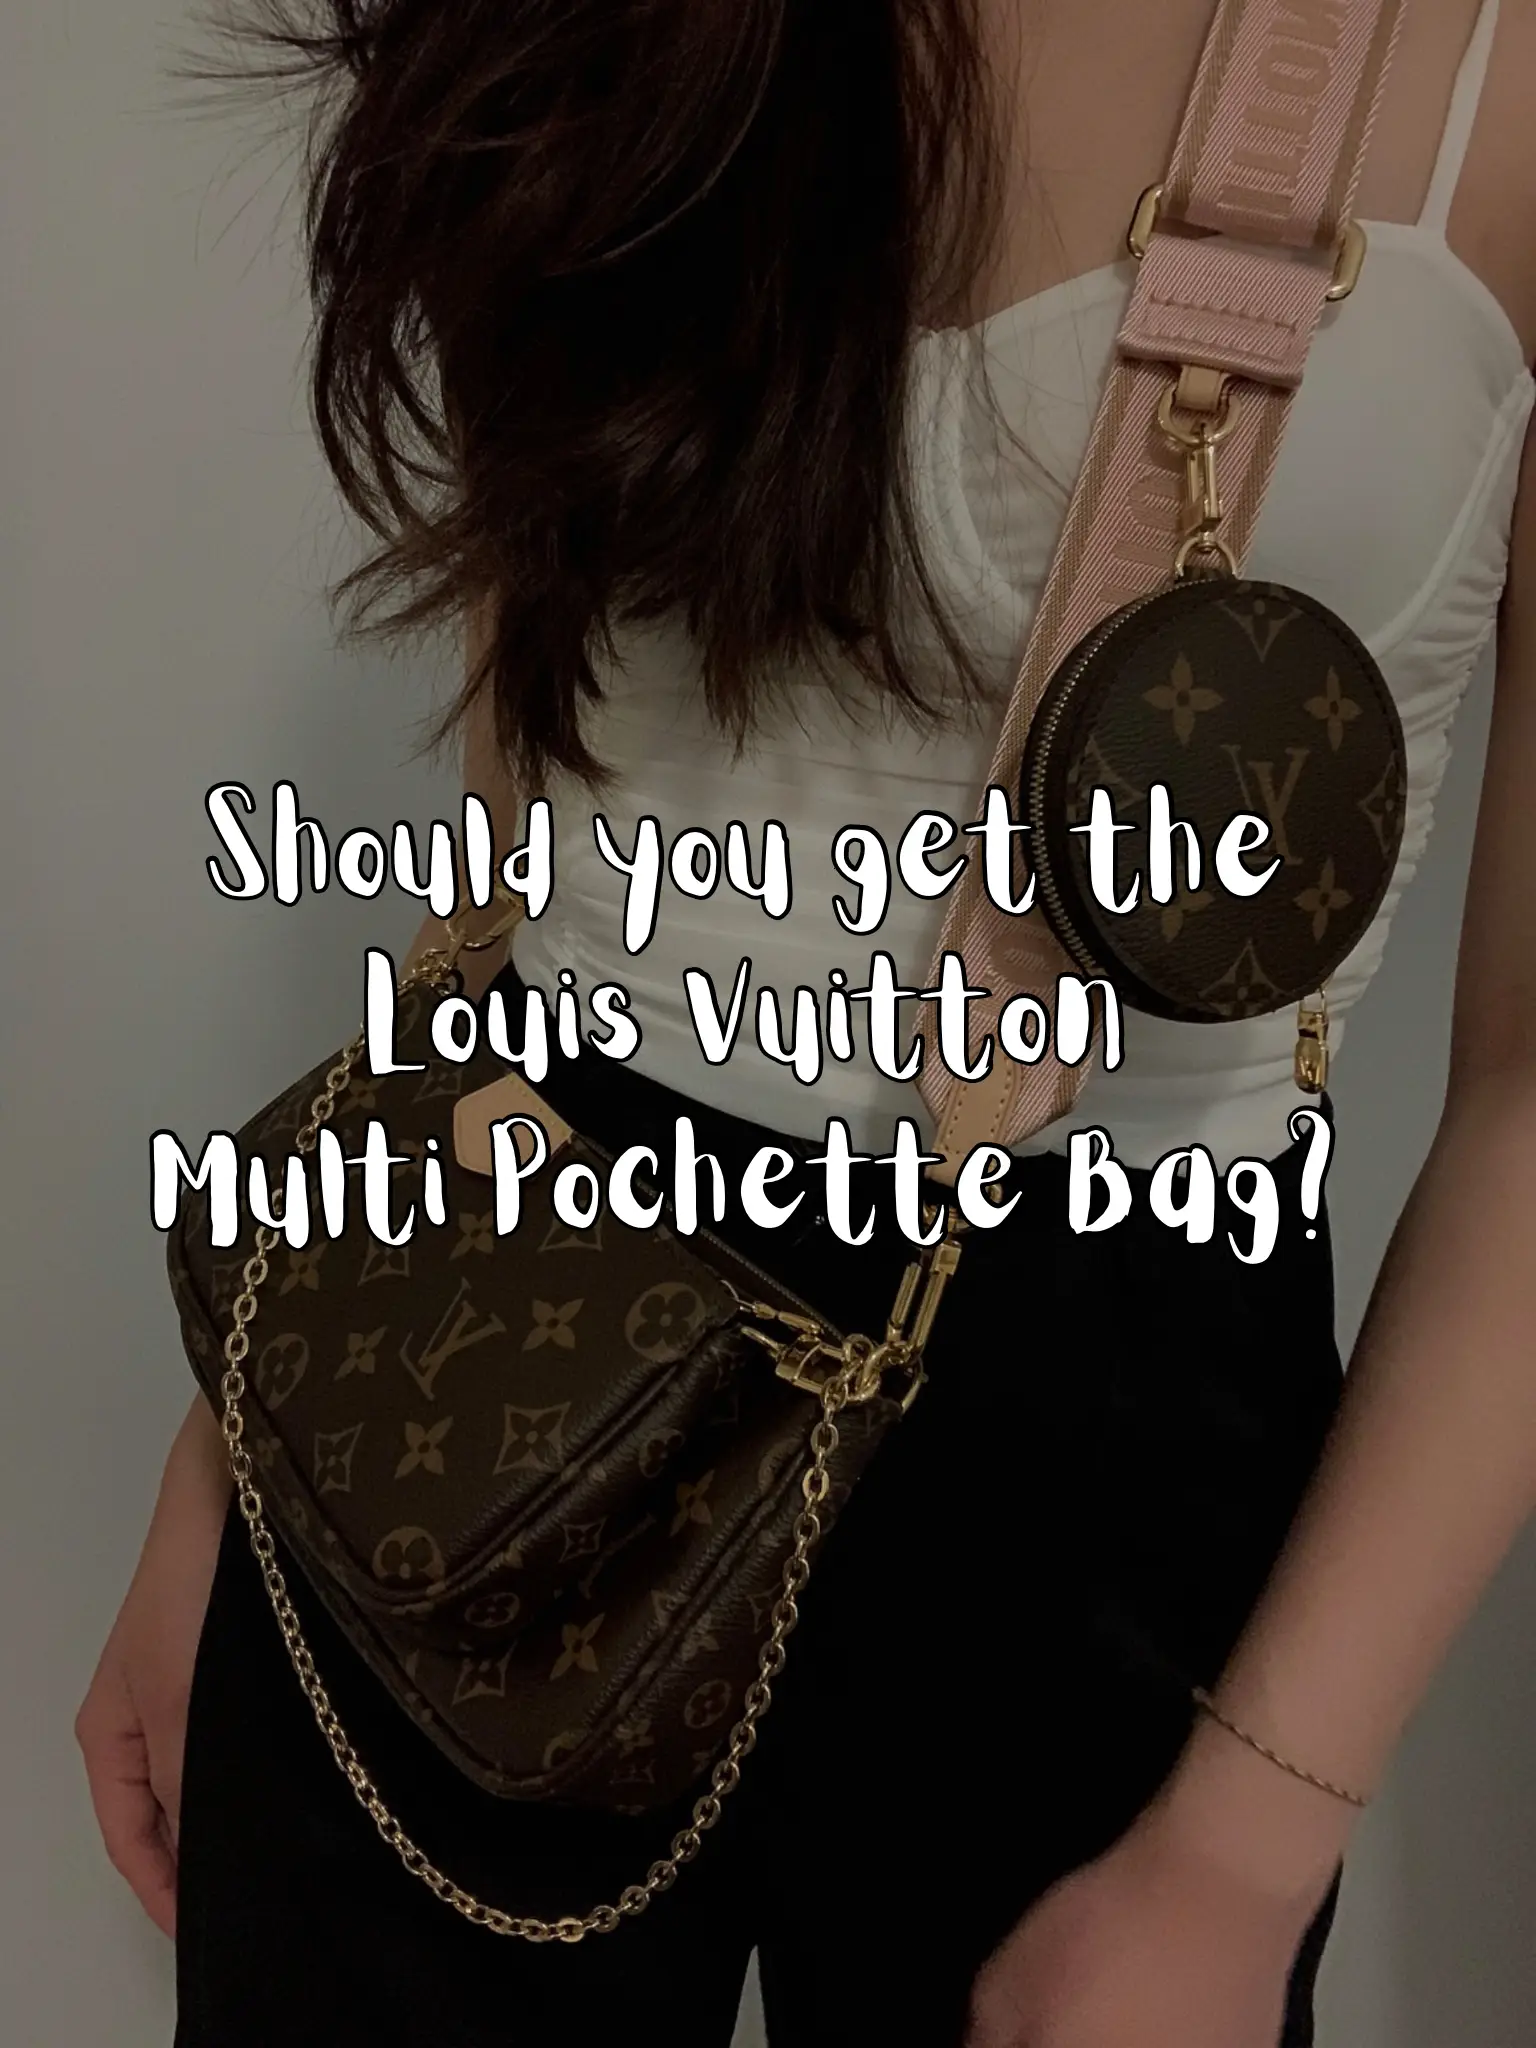 Louis Vuitton gave me a one-to-one swap for my Multi Pochette